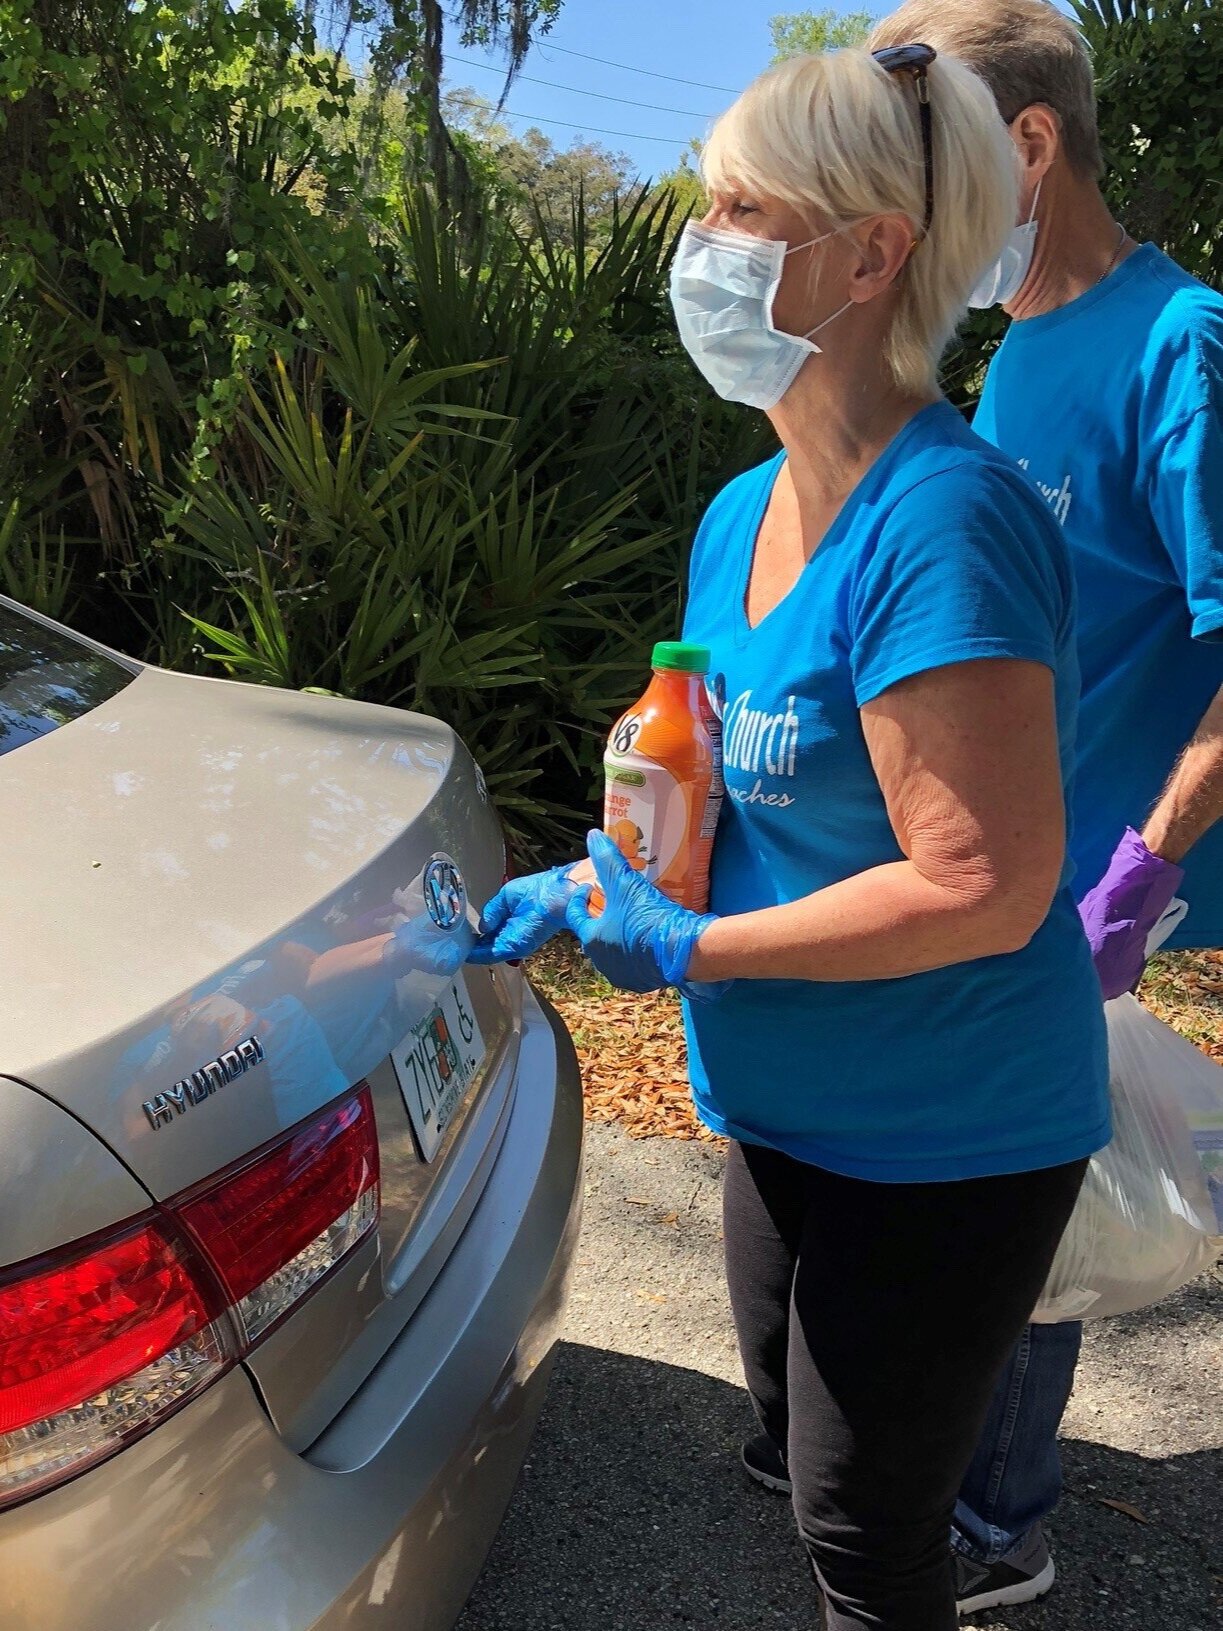 BEAM volunteers load groceries into the trunk of a car during a BEAM Mobile Food Drive in Mayport. BEAM is now offering “drive-thru” style pick-up from Mobile Pantries to ensure the safety of clients and volunteers during the COVID-19 Pandemic.